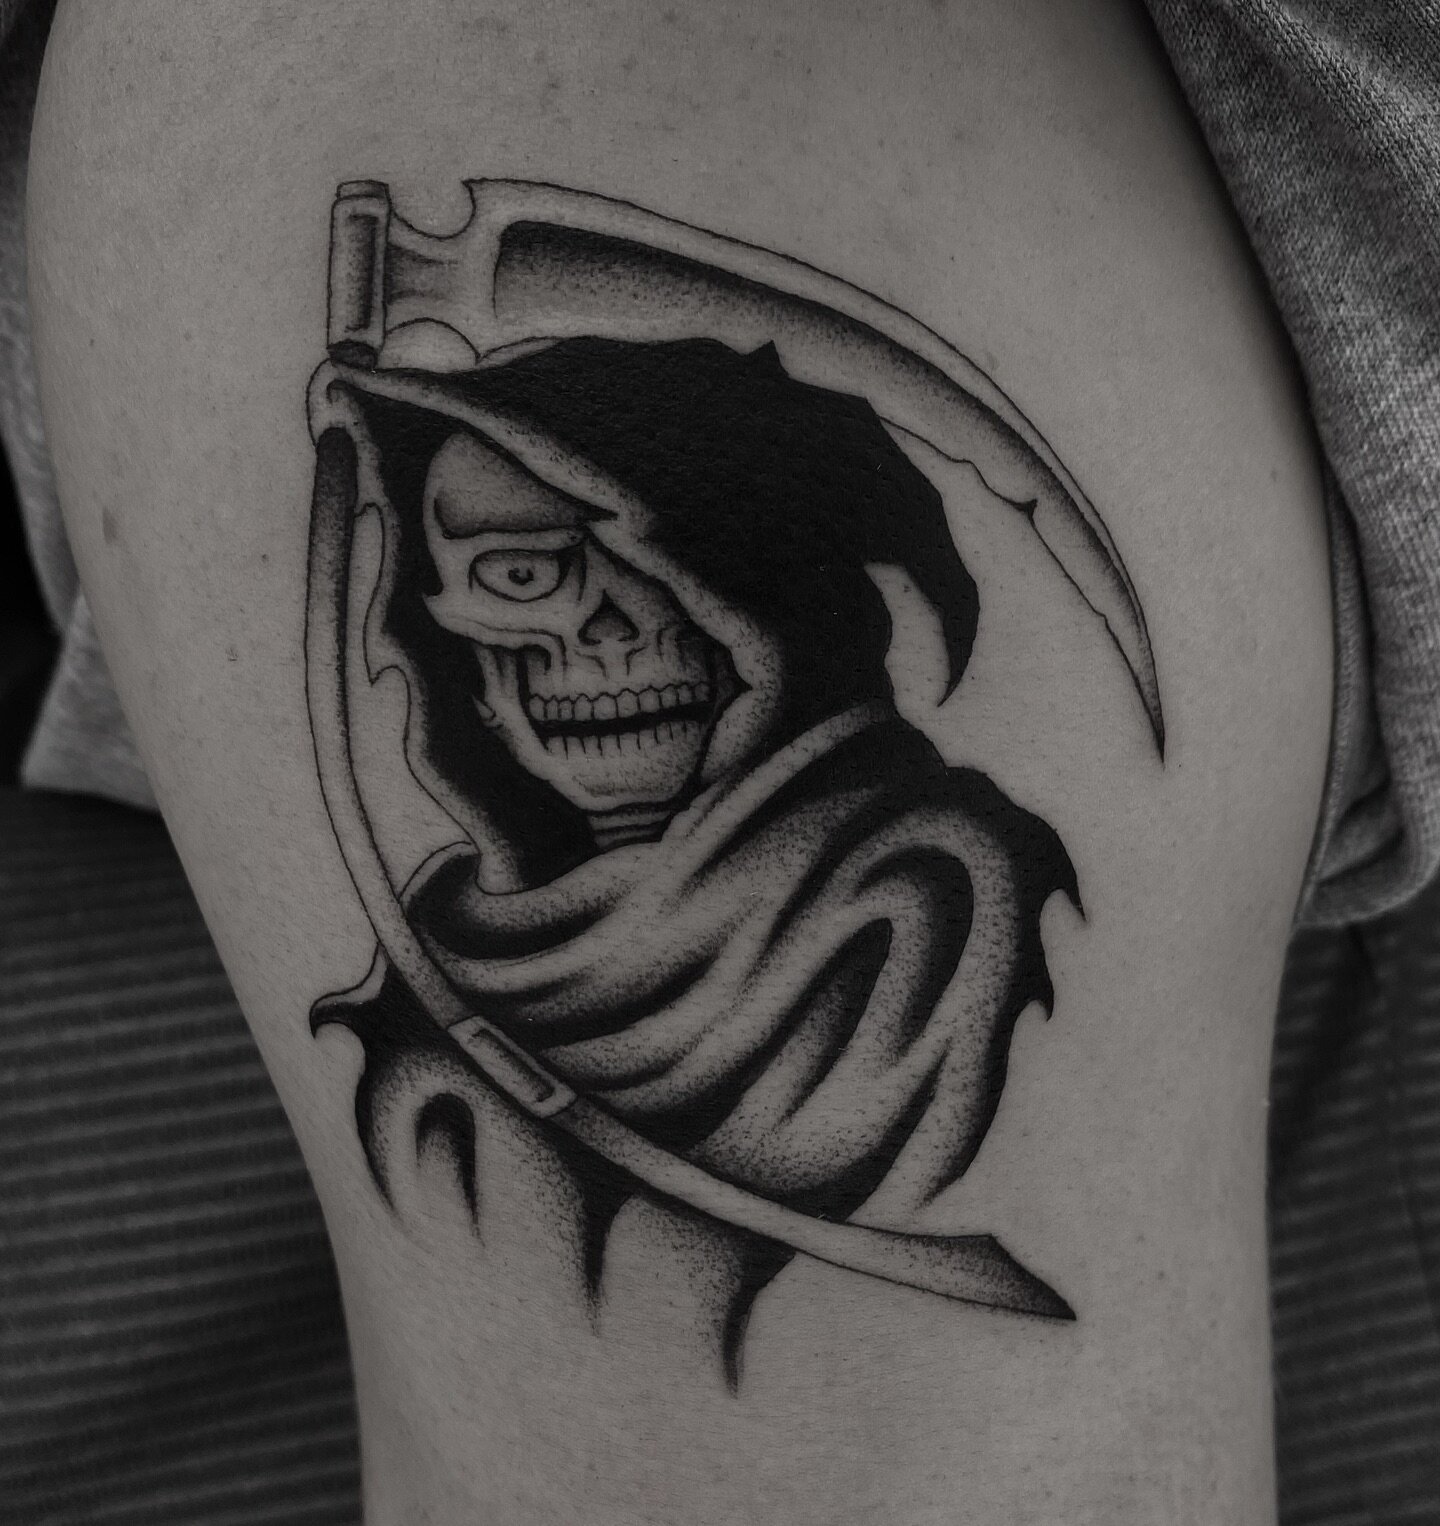 Made @mans_ruin_tattoo bookings are open for January DM for a spot! 
Thanks to Balin for the trust on this one. 
.
.
.
.
#tattoo #tattoos #finelinetattoo #fineline #finelinework #blackandgrey #melbourneart #melbournetattoo #reaper #reapertattoo #oldl